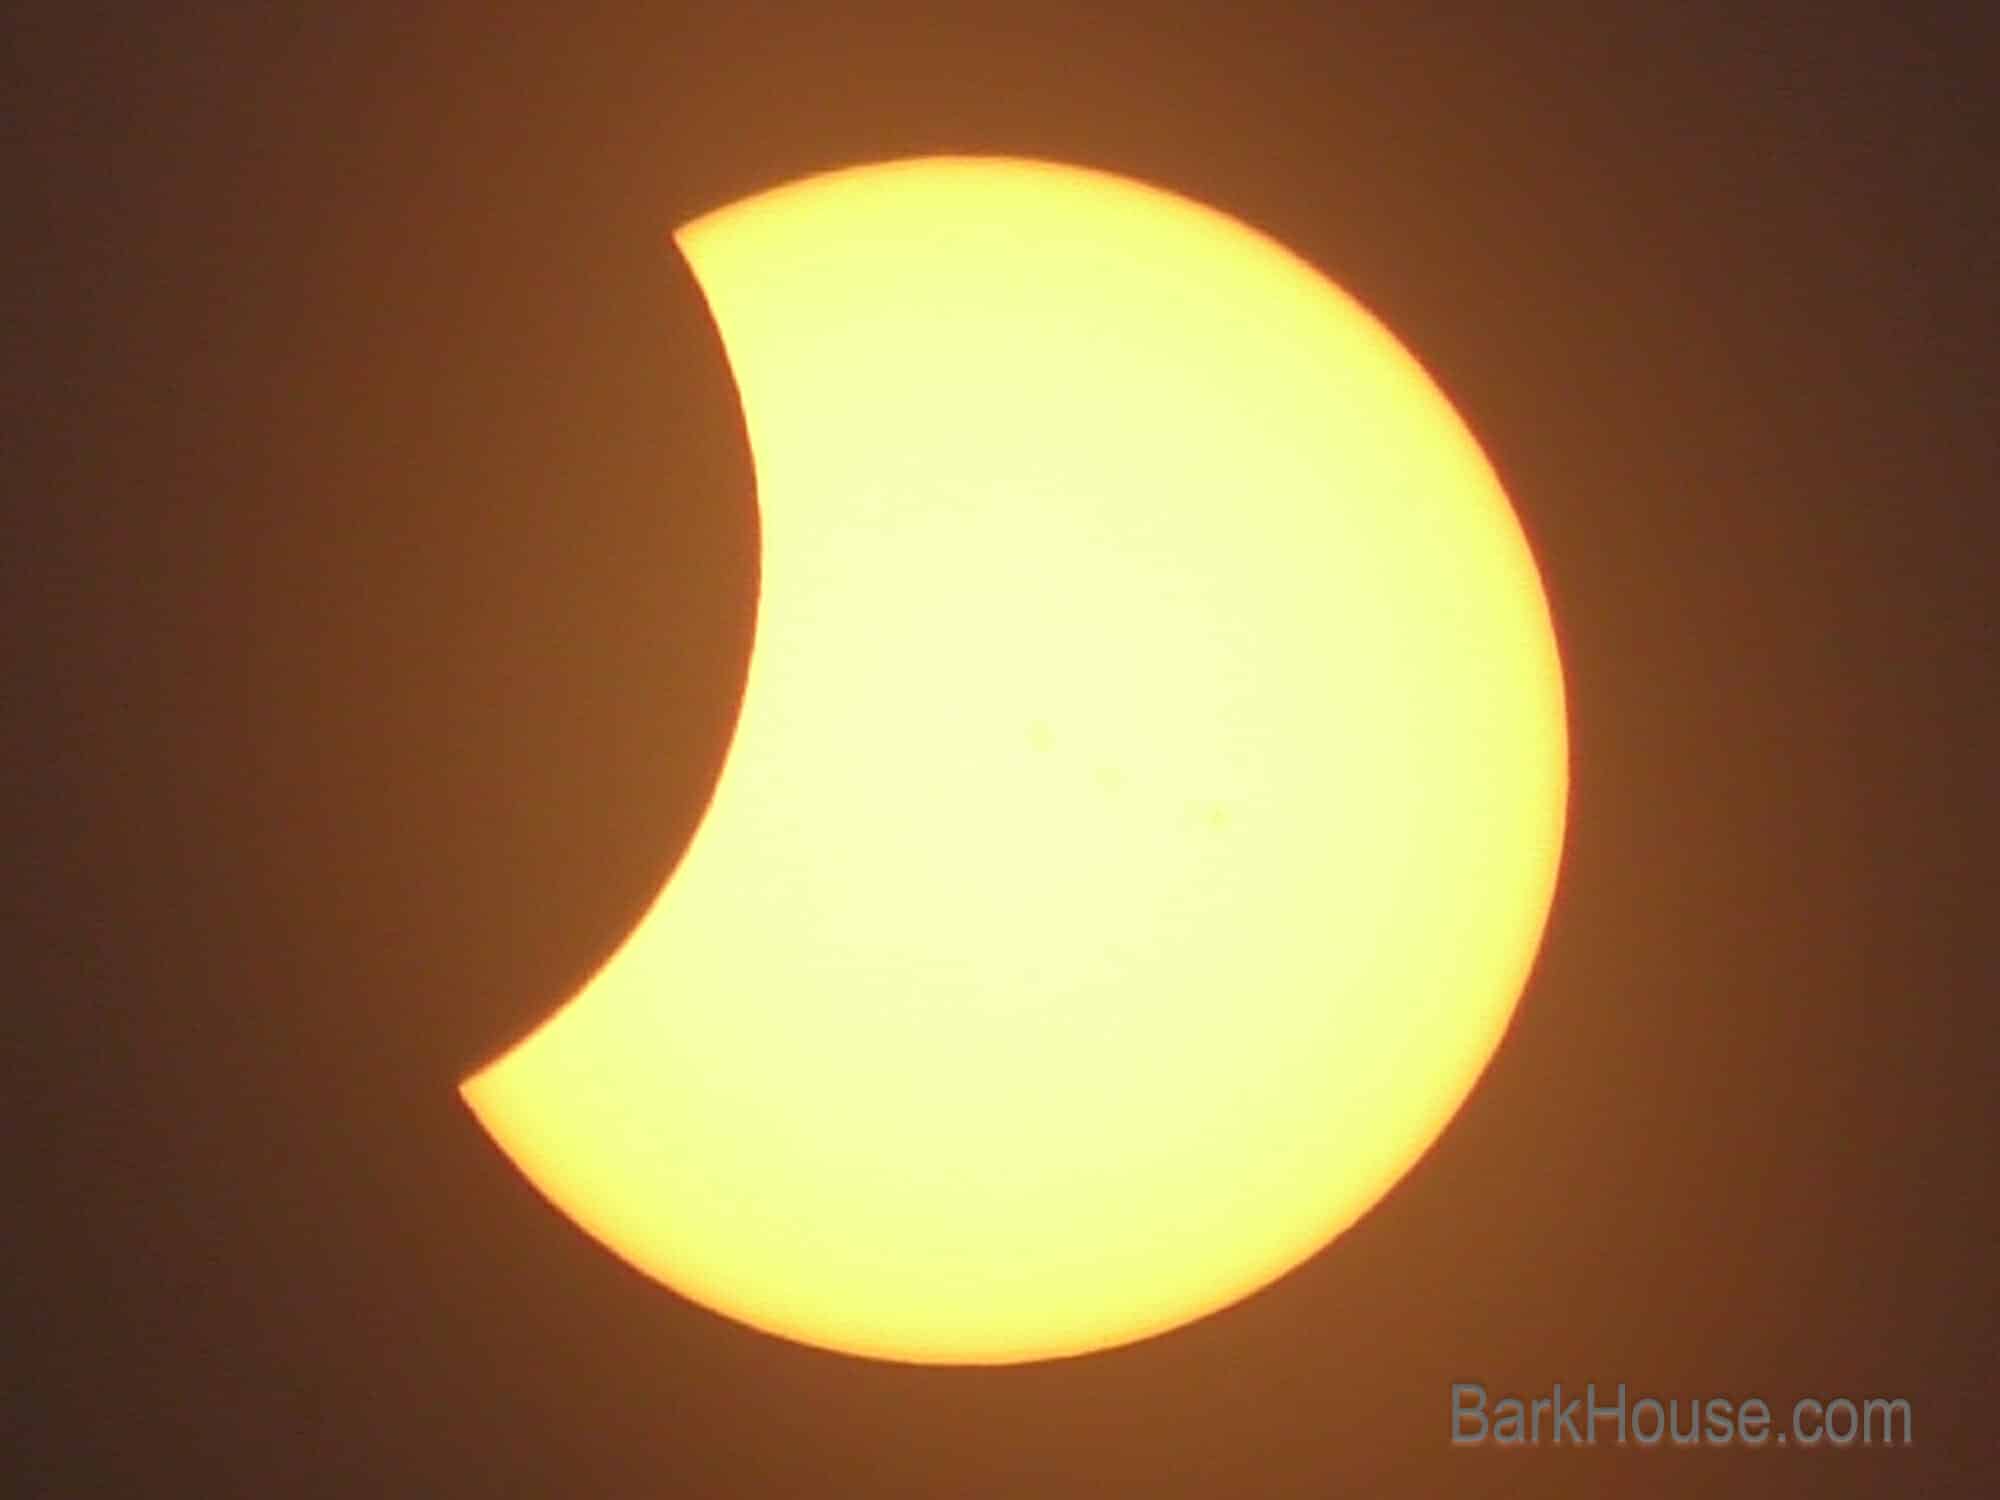 Bark House, original manufacturer of the Poplar Bark Shingle, took a picture of the solar eclipse on August 21, 2017.